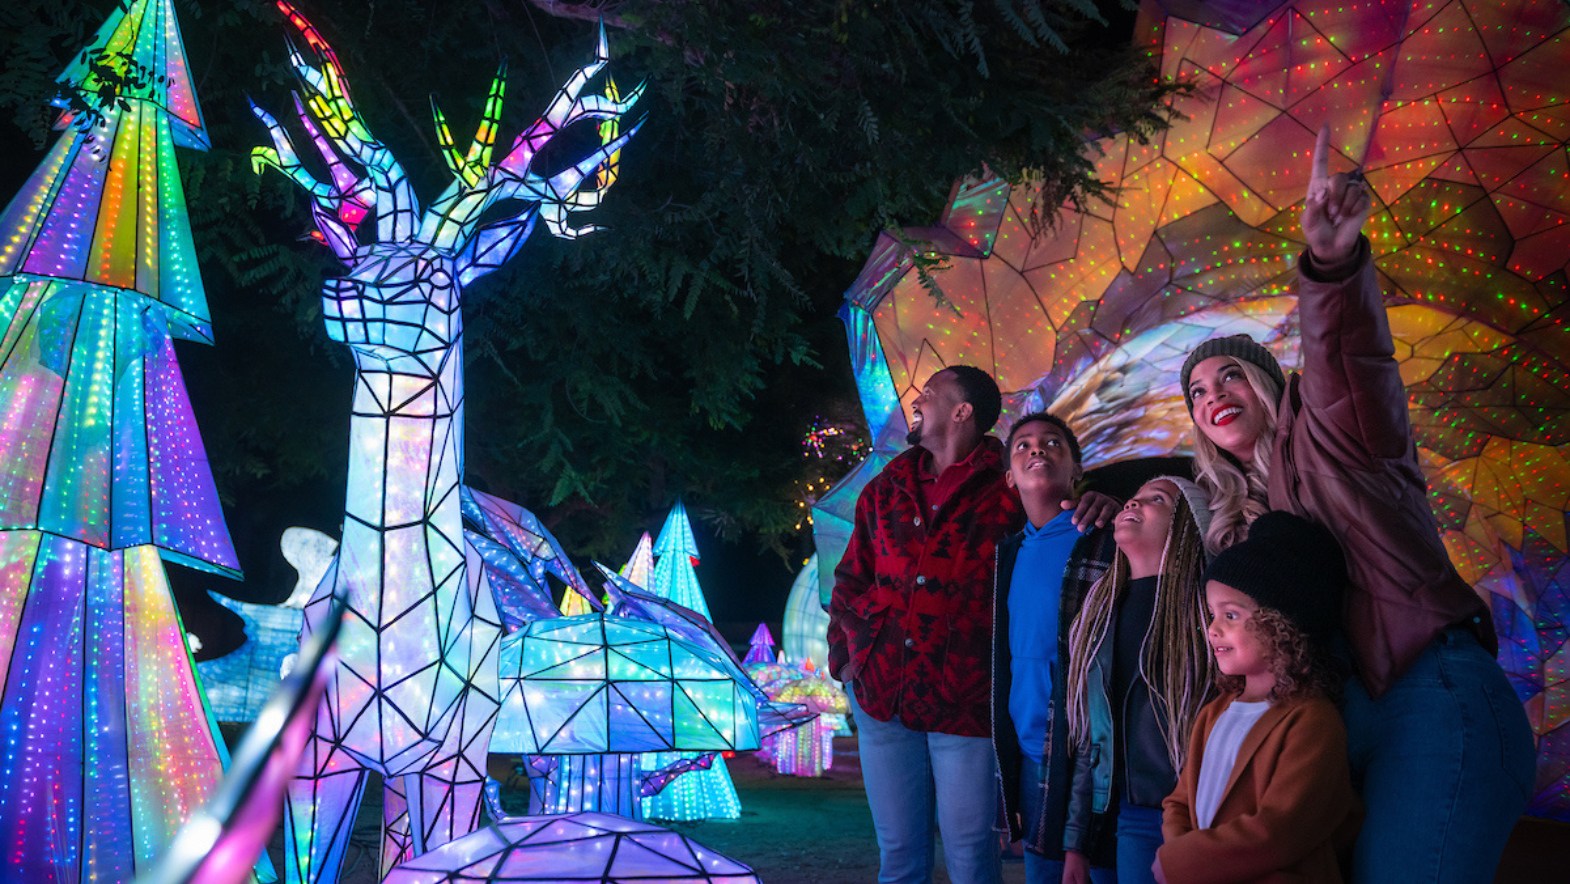 Make your December something to remember with these festive events in Los Angeles, and enjoy them with the whole family.